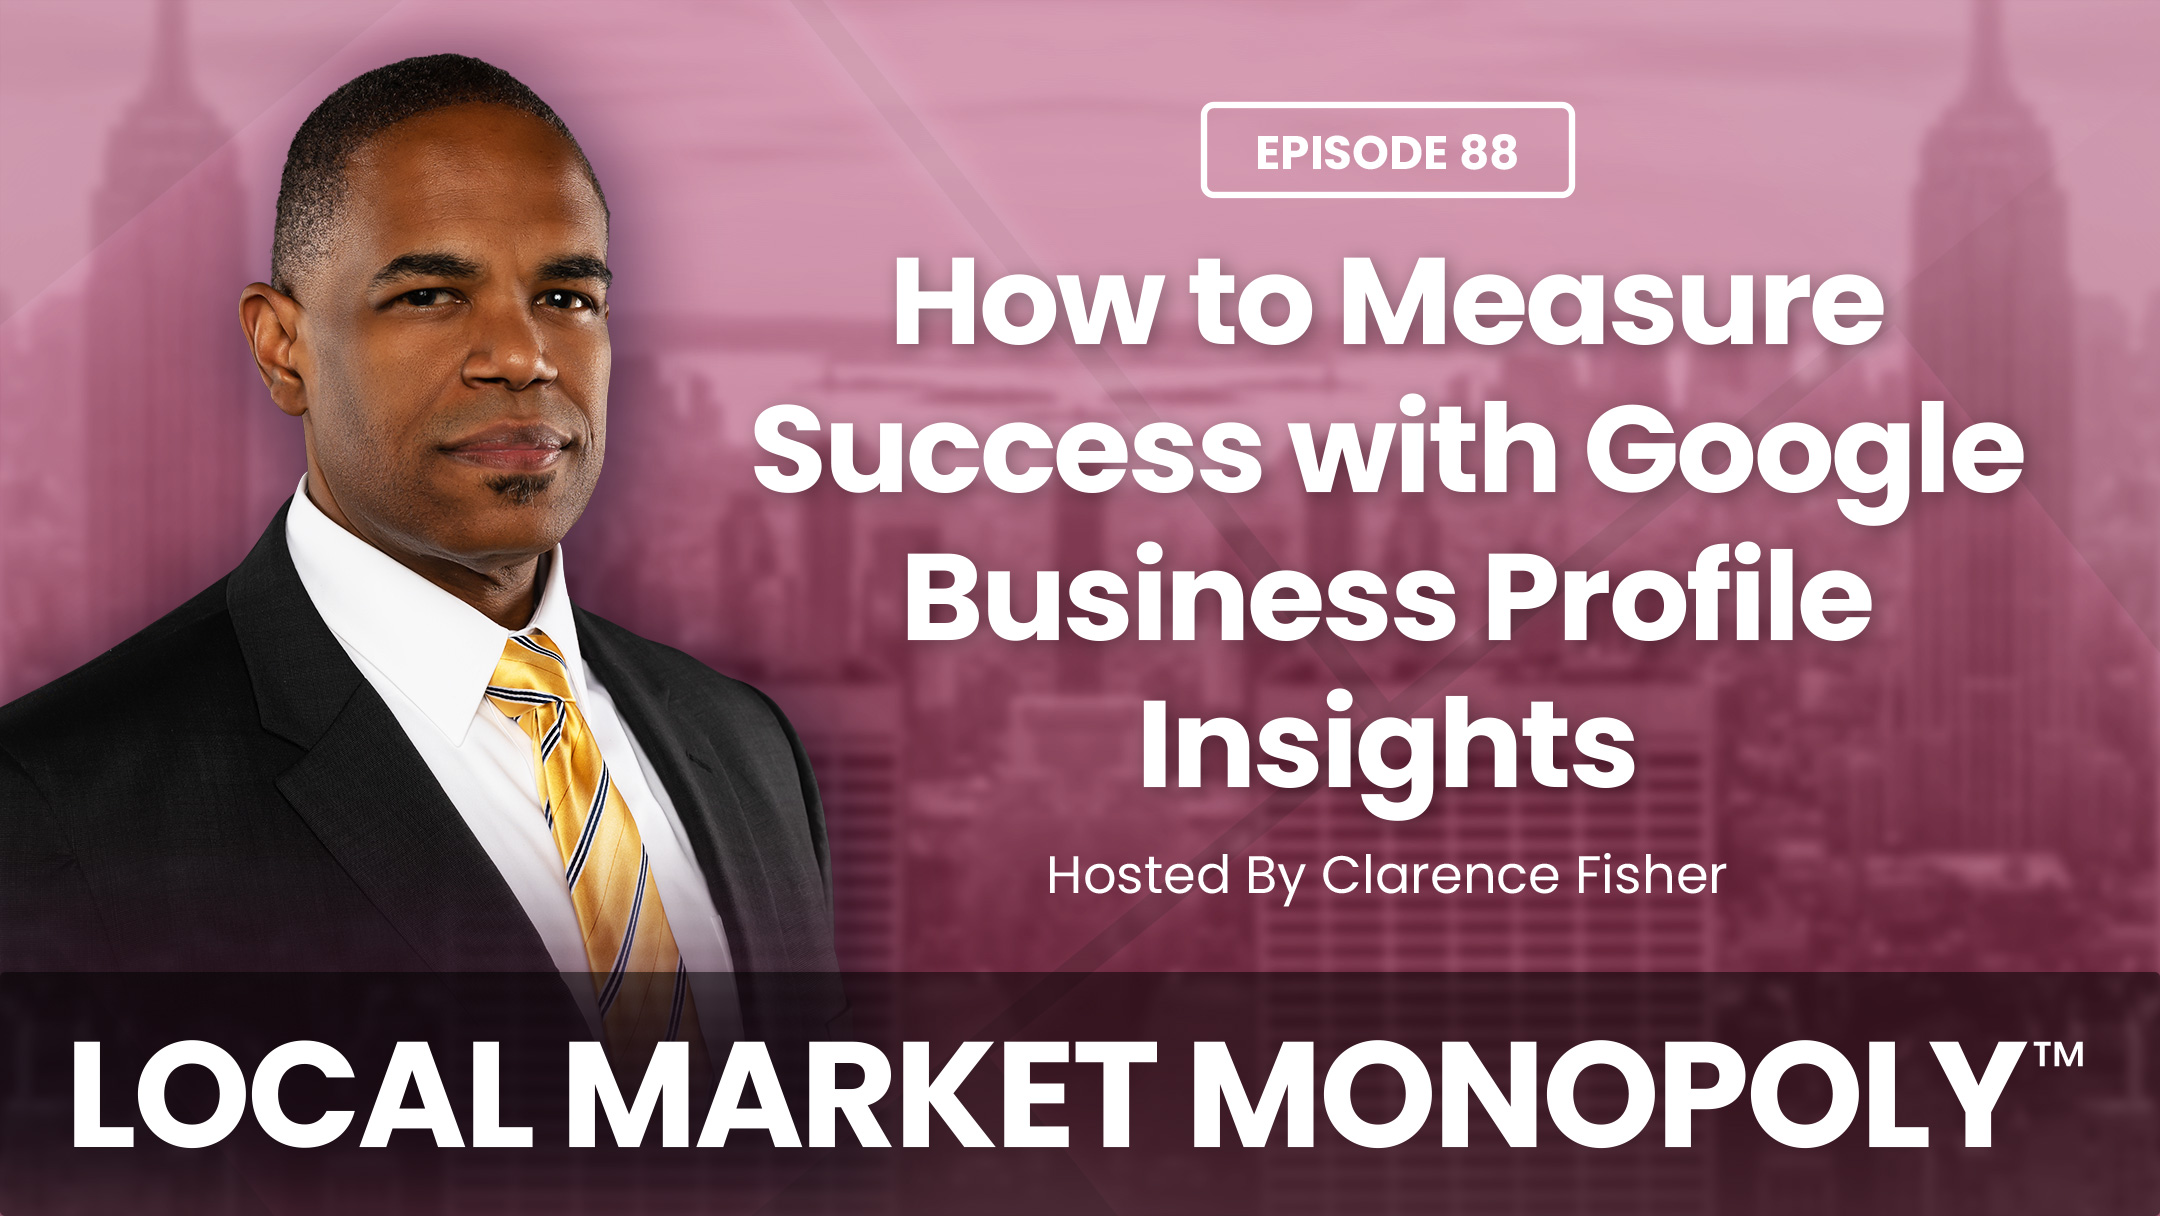 How to Measure Success with Google Business Profile Insights